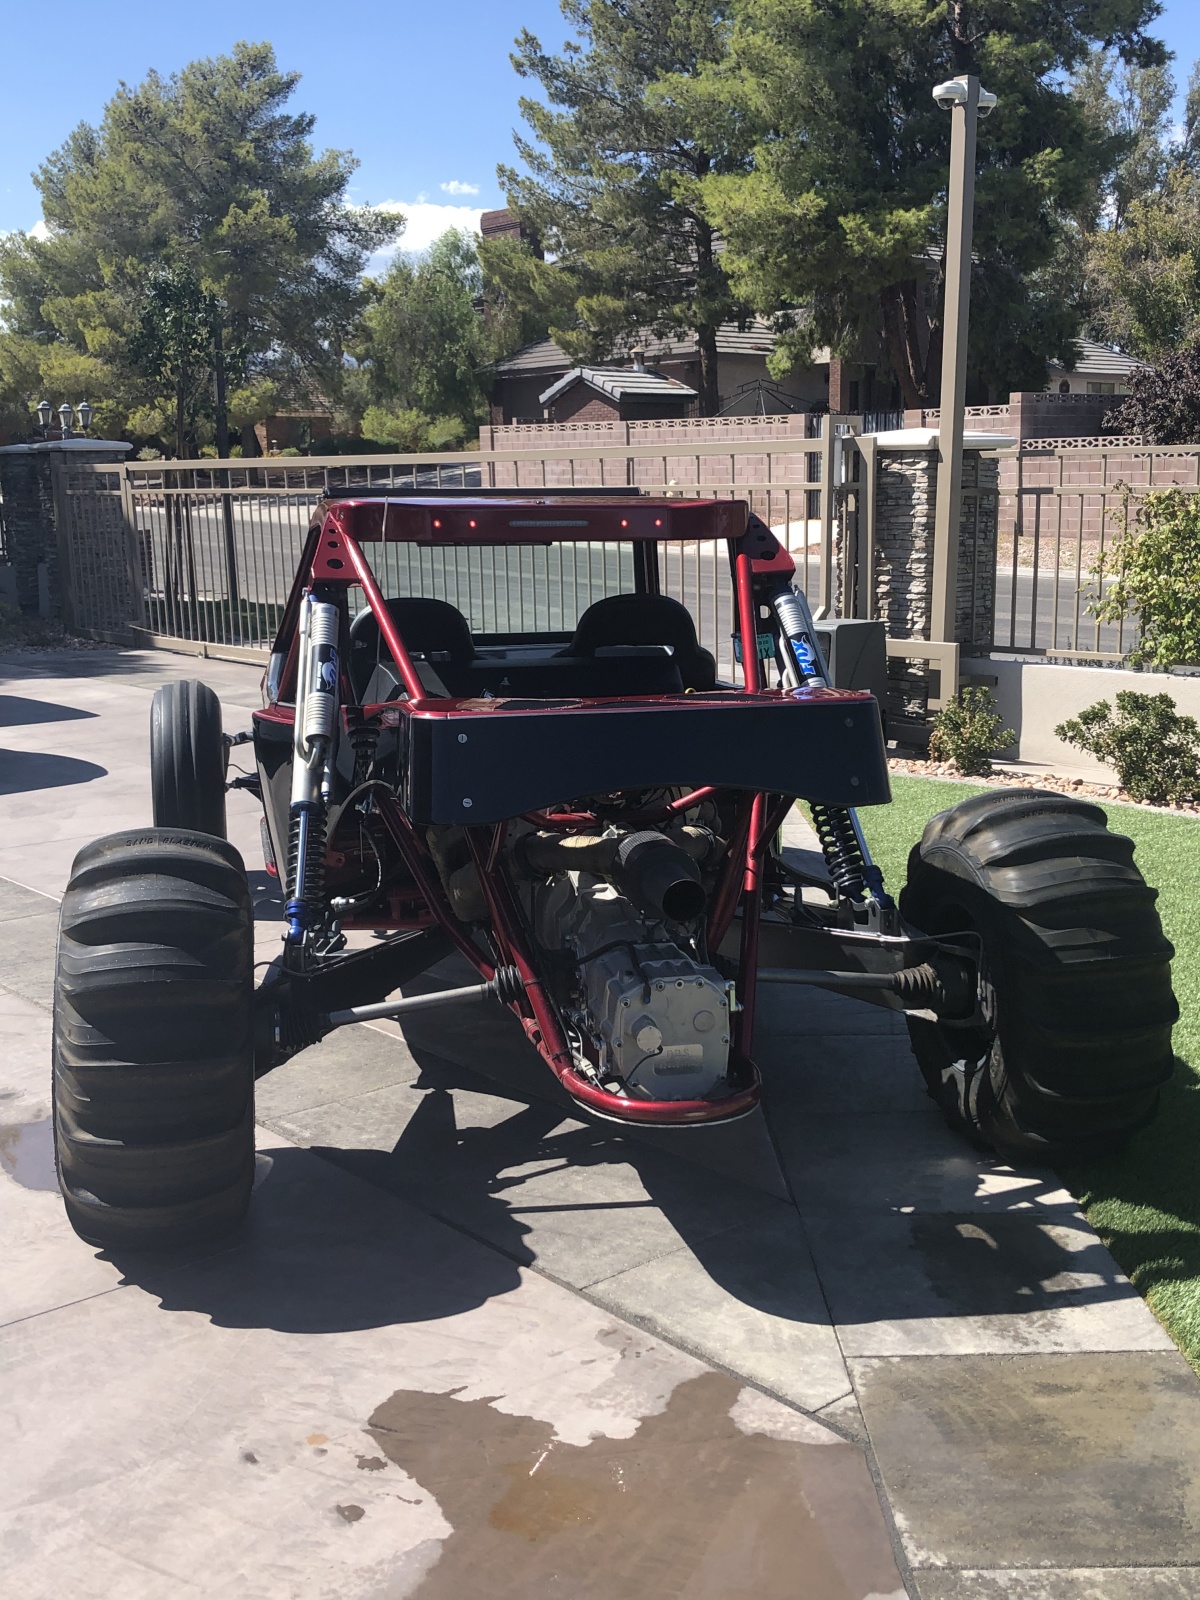 suspension unlimited sand cars for sale